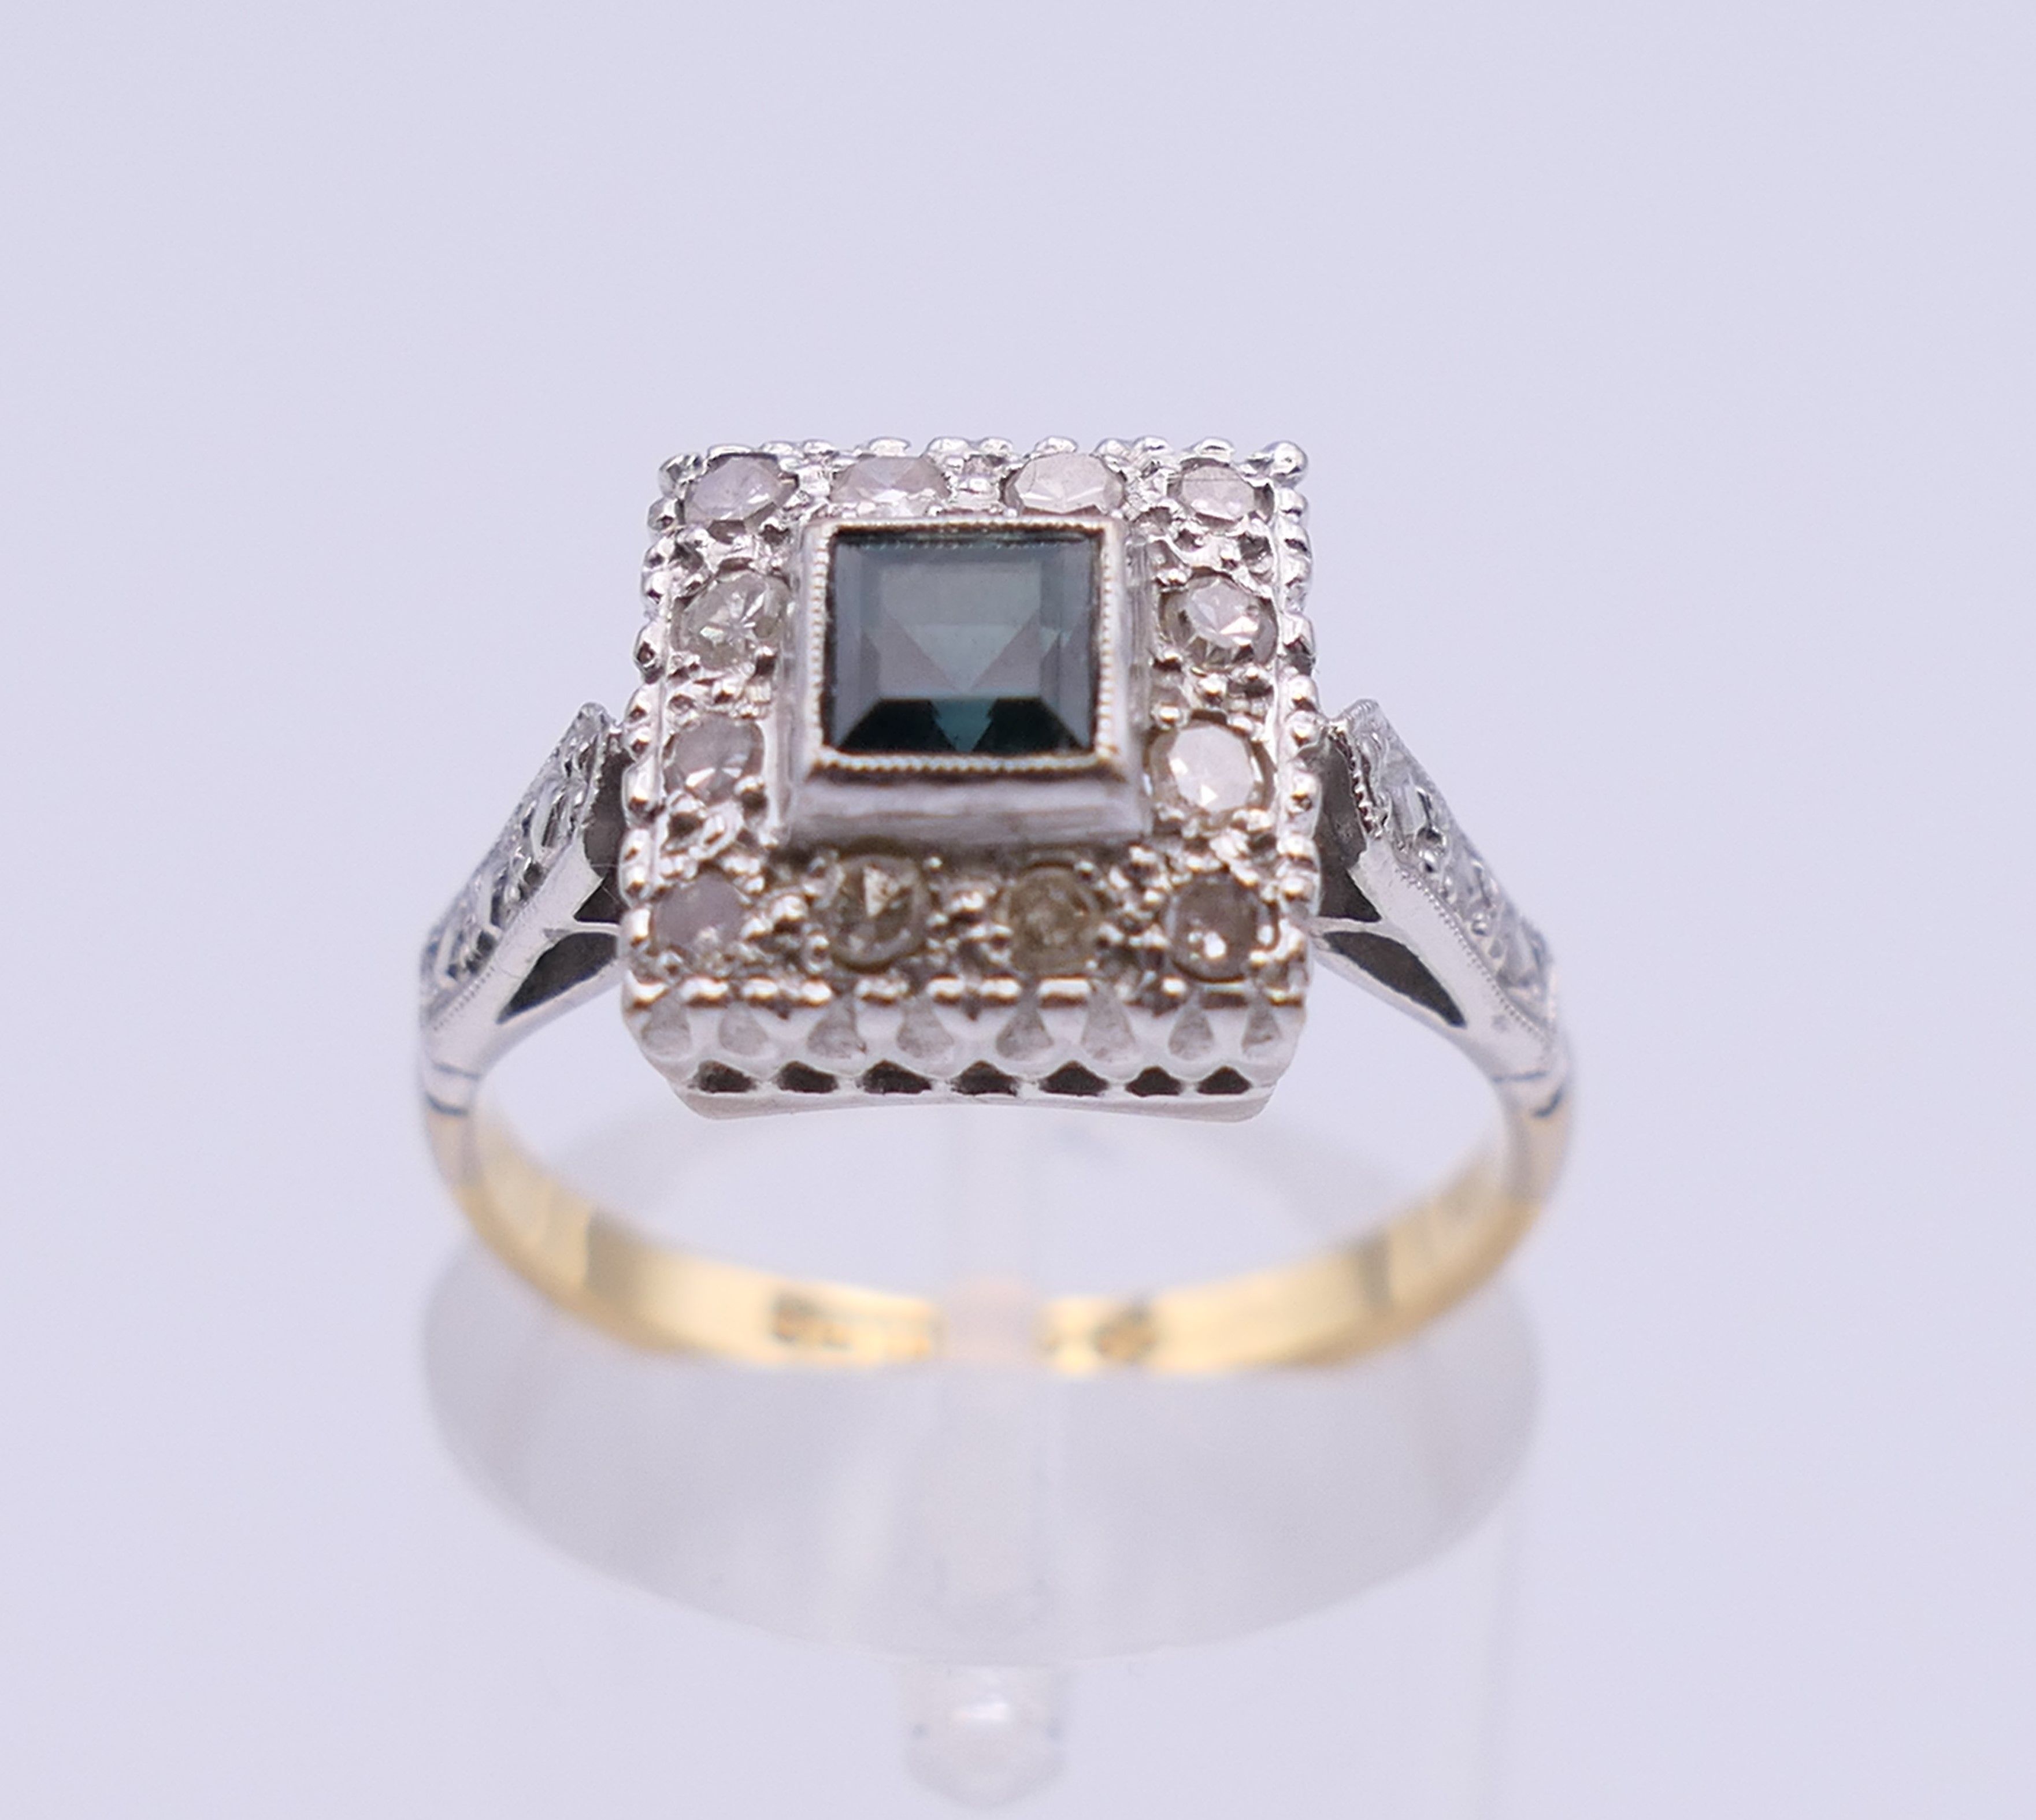 An Art Deco style 18 ct gold diamond and sapphire ring. Ring size M. 4.6 grammes total weight. - Image 3 of 8